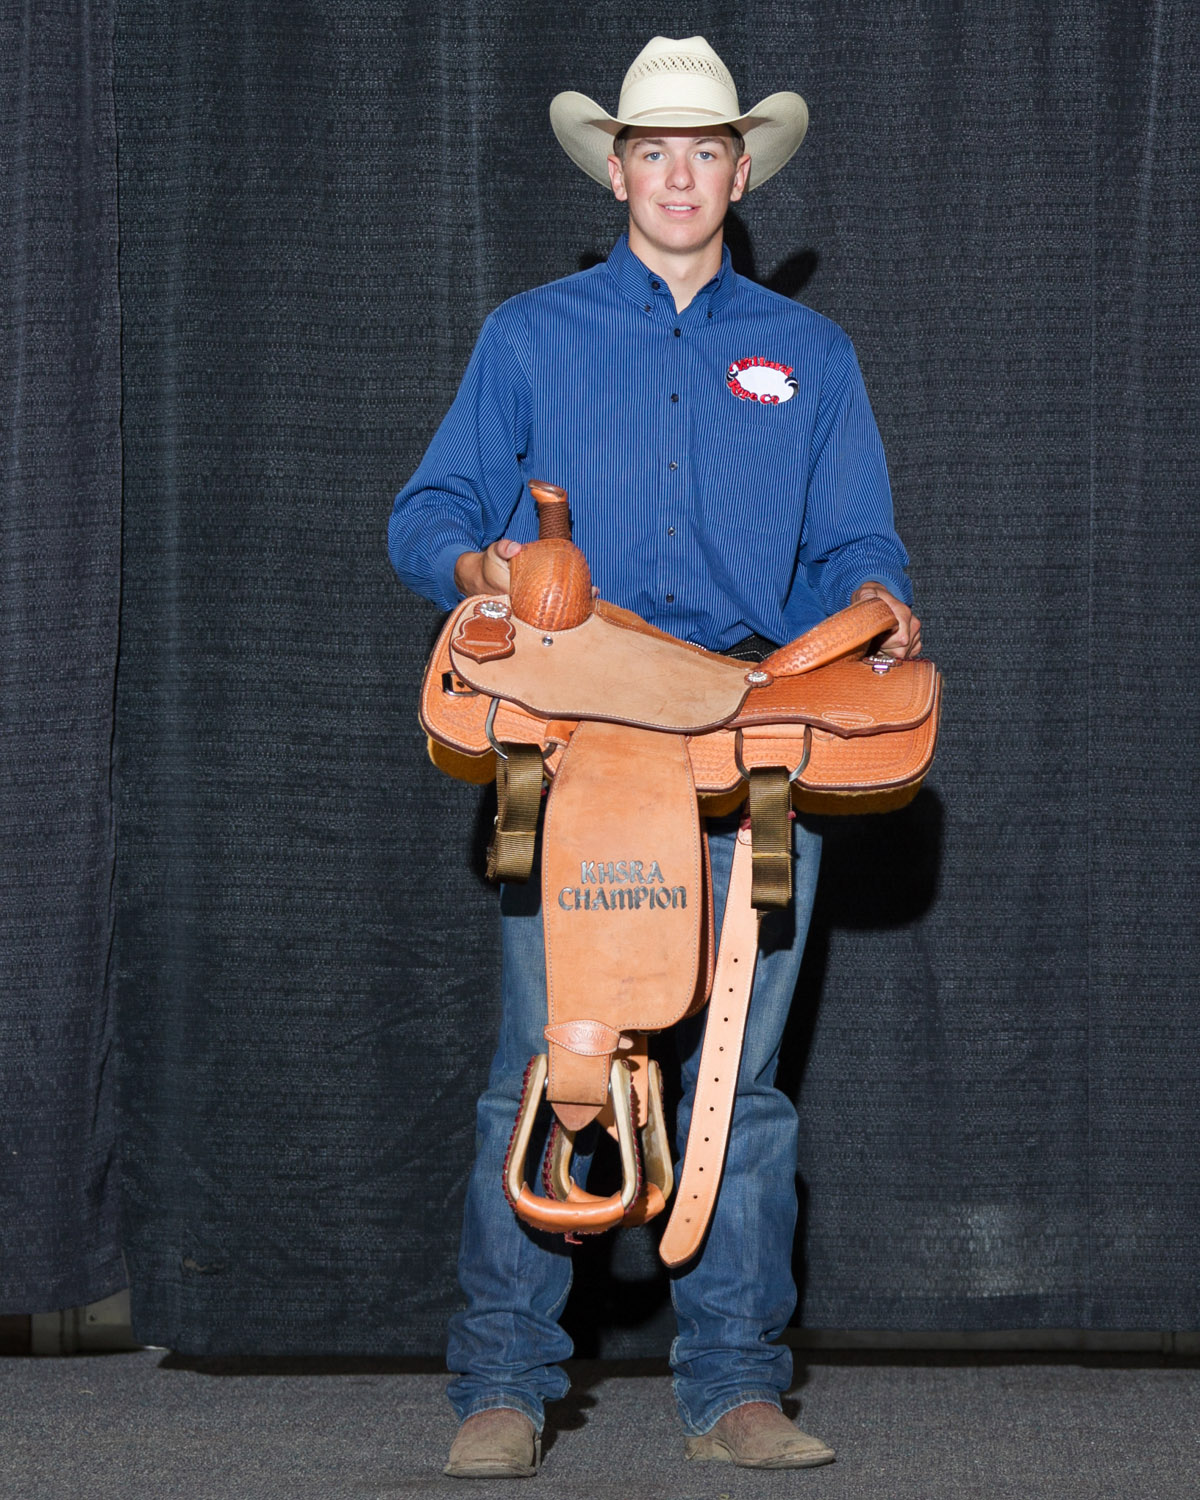 Cooper Martin, Alma, was honored as the all-around cowboy at the conclusion of the Kansas High School Rodeo Finals in Topeka. He was the yearend champion in calf roping and third in team roping, with Riccki Yaussi, Udall, qualifying in both events to compete at the National High School Finals Rodeo, July 13-19, in Rock Springs, Wyoming. (Photo courtesy Kent Kerschner, www.fotocowboy.com, kent@fotocowboy.com.)